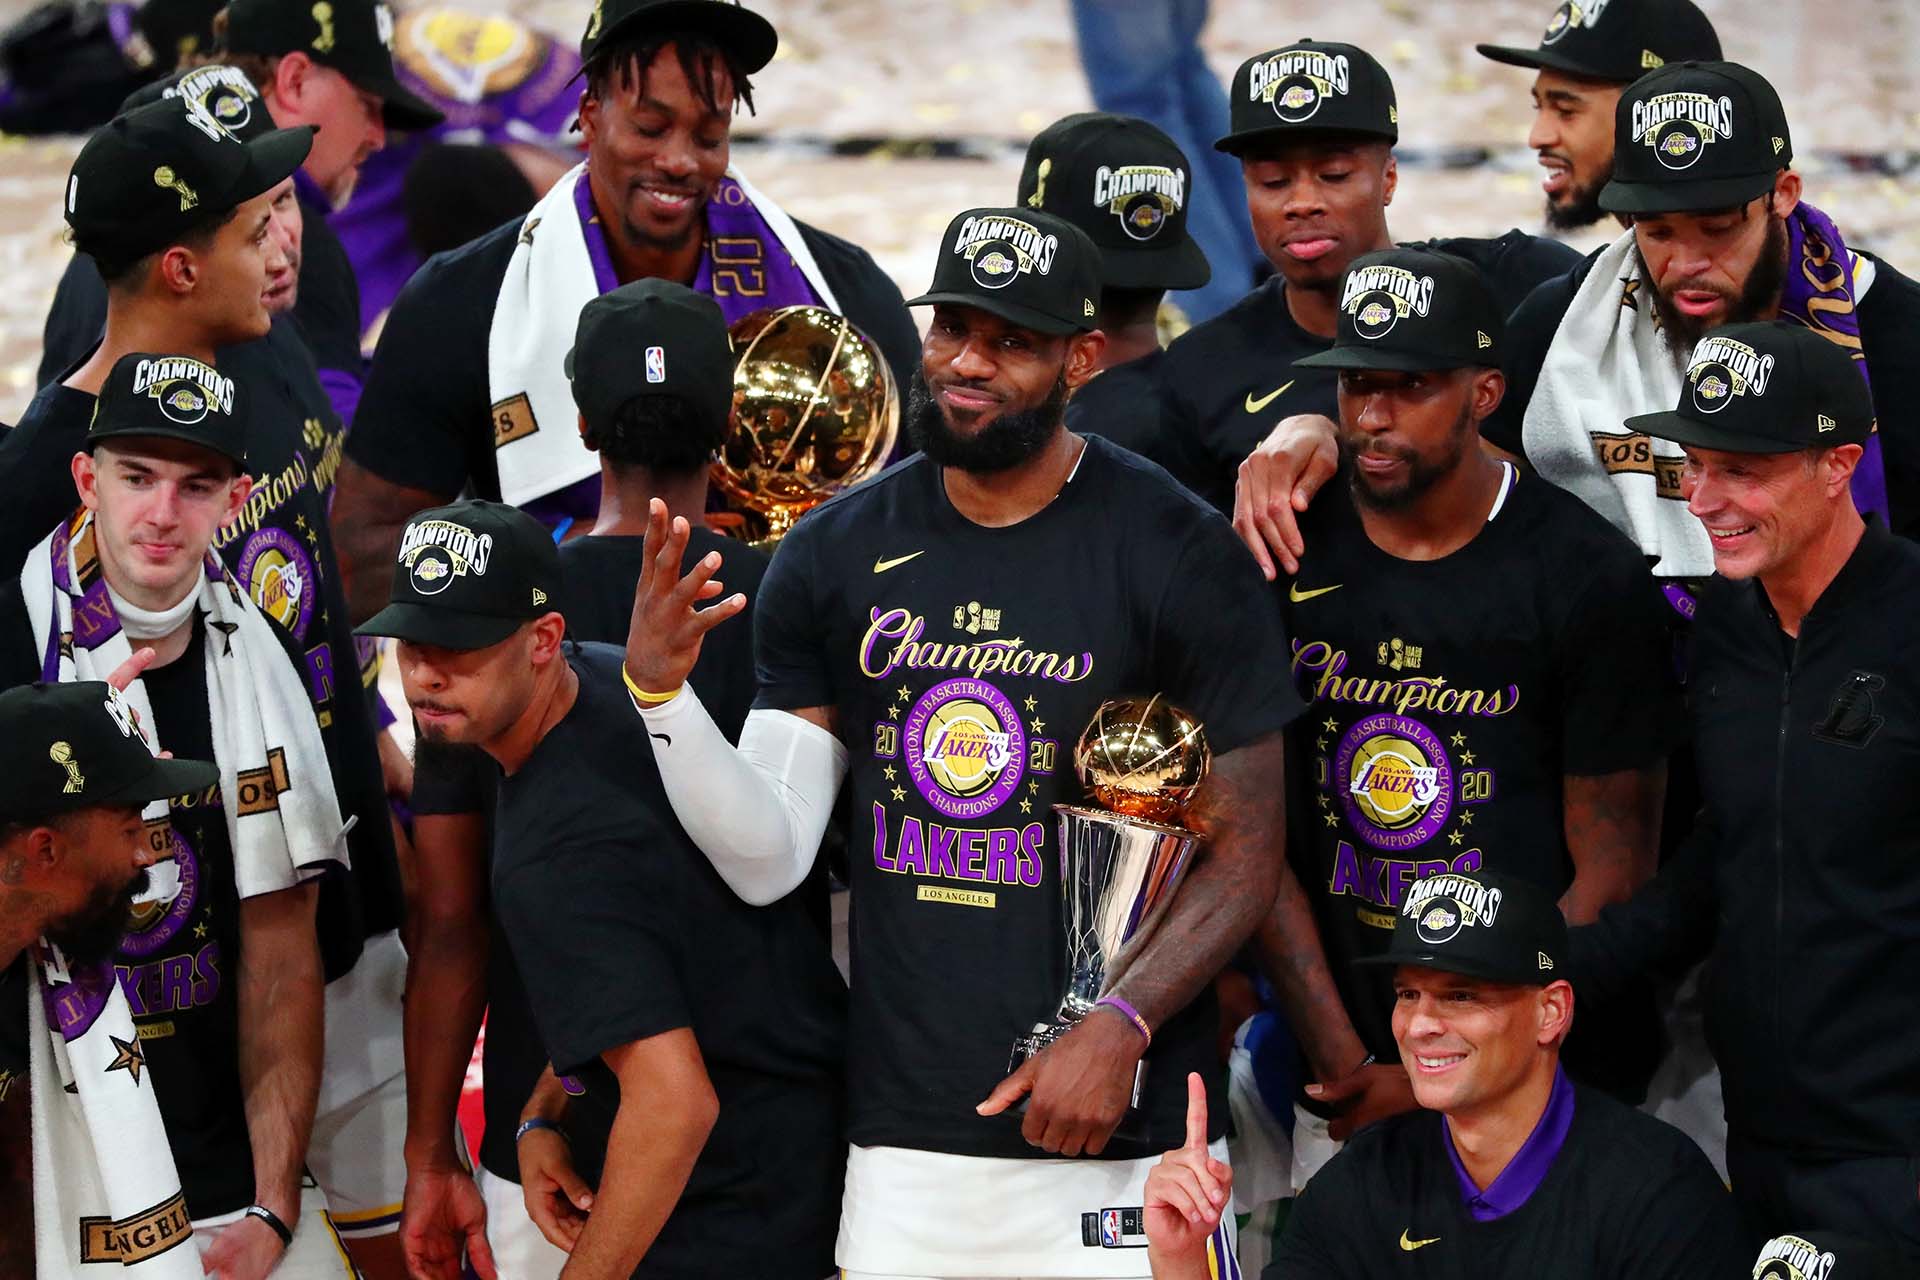 Oct 11, 2020; Lake Buena Vista, Florida, USA; Los Angeles Lakers forward LeBron James (23) holds up four fingers after winning his fourth NBA championship after game six of the 2020 NBA Finals at AdventHealth Arena. The Los Angeles Lakers won 106-93 to win the series. Mandatory Credit: Kim Klement-USA TODAY Sports